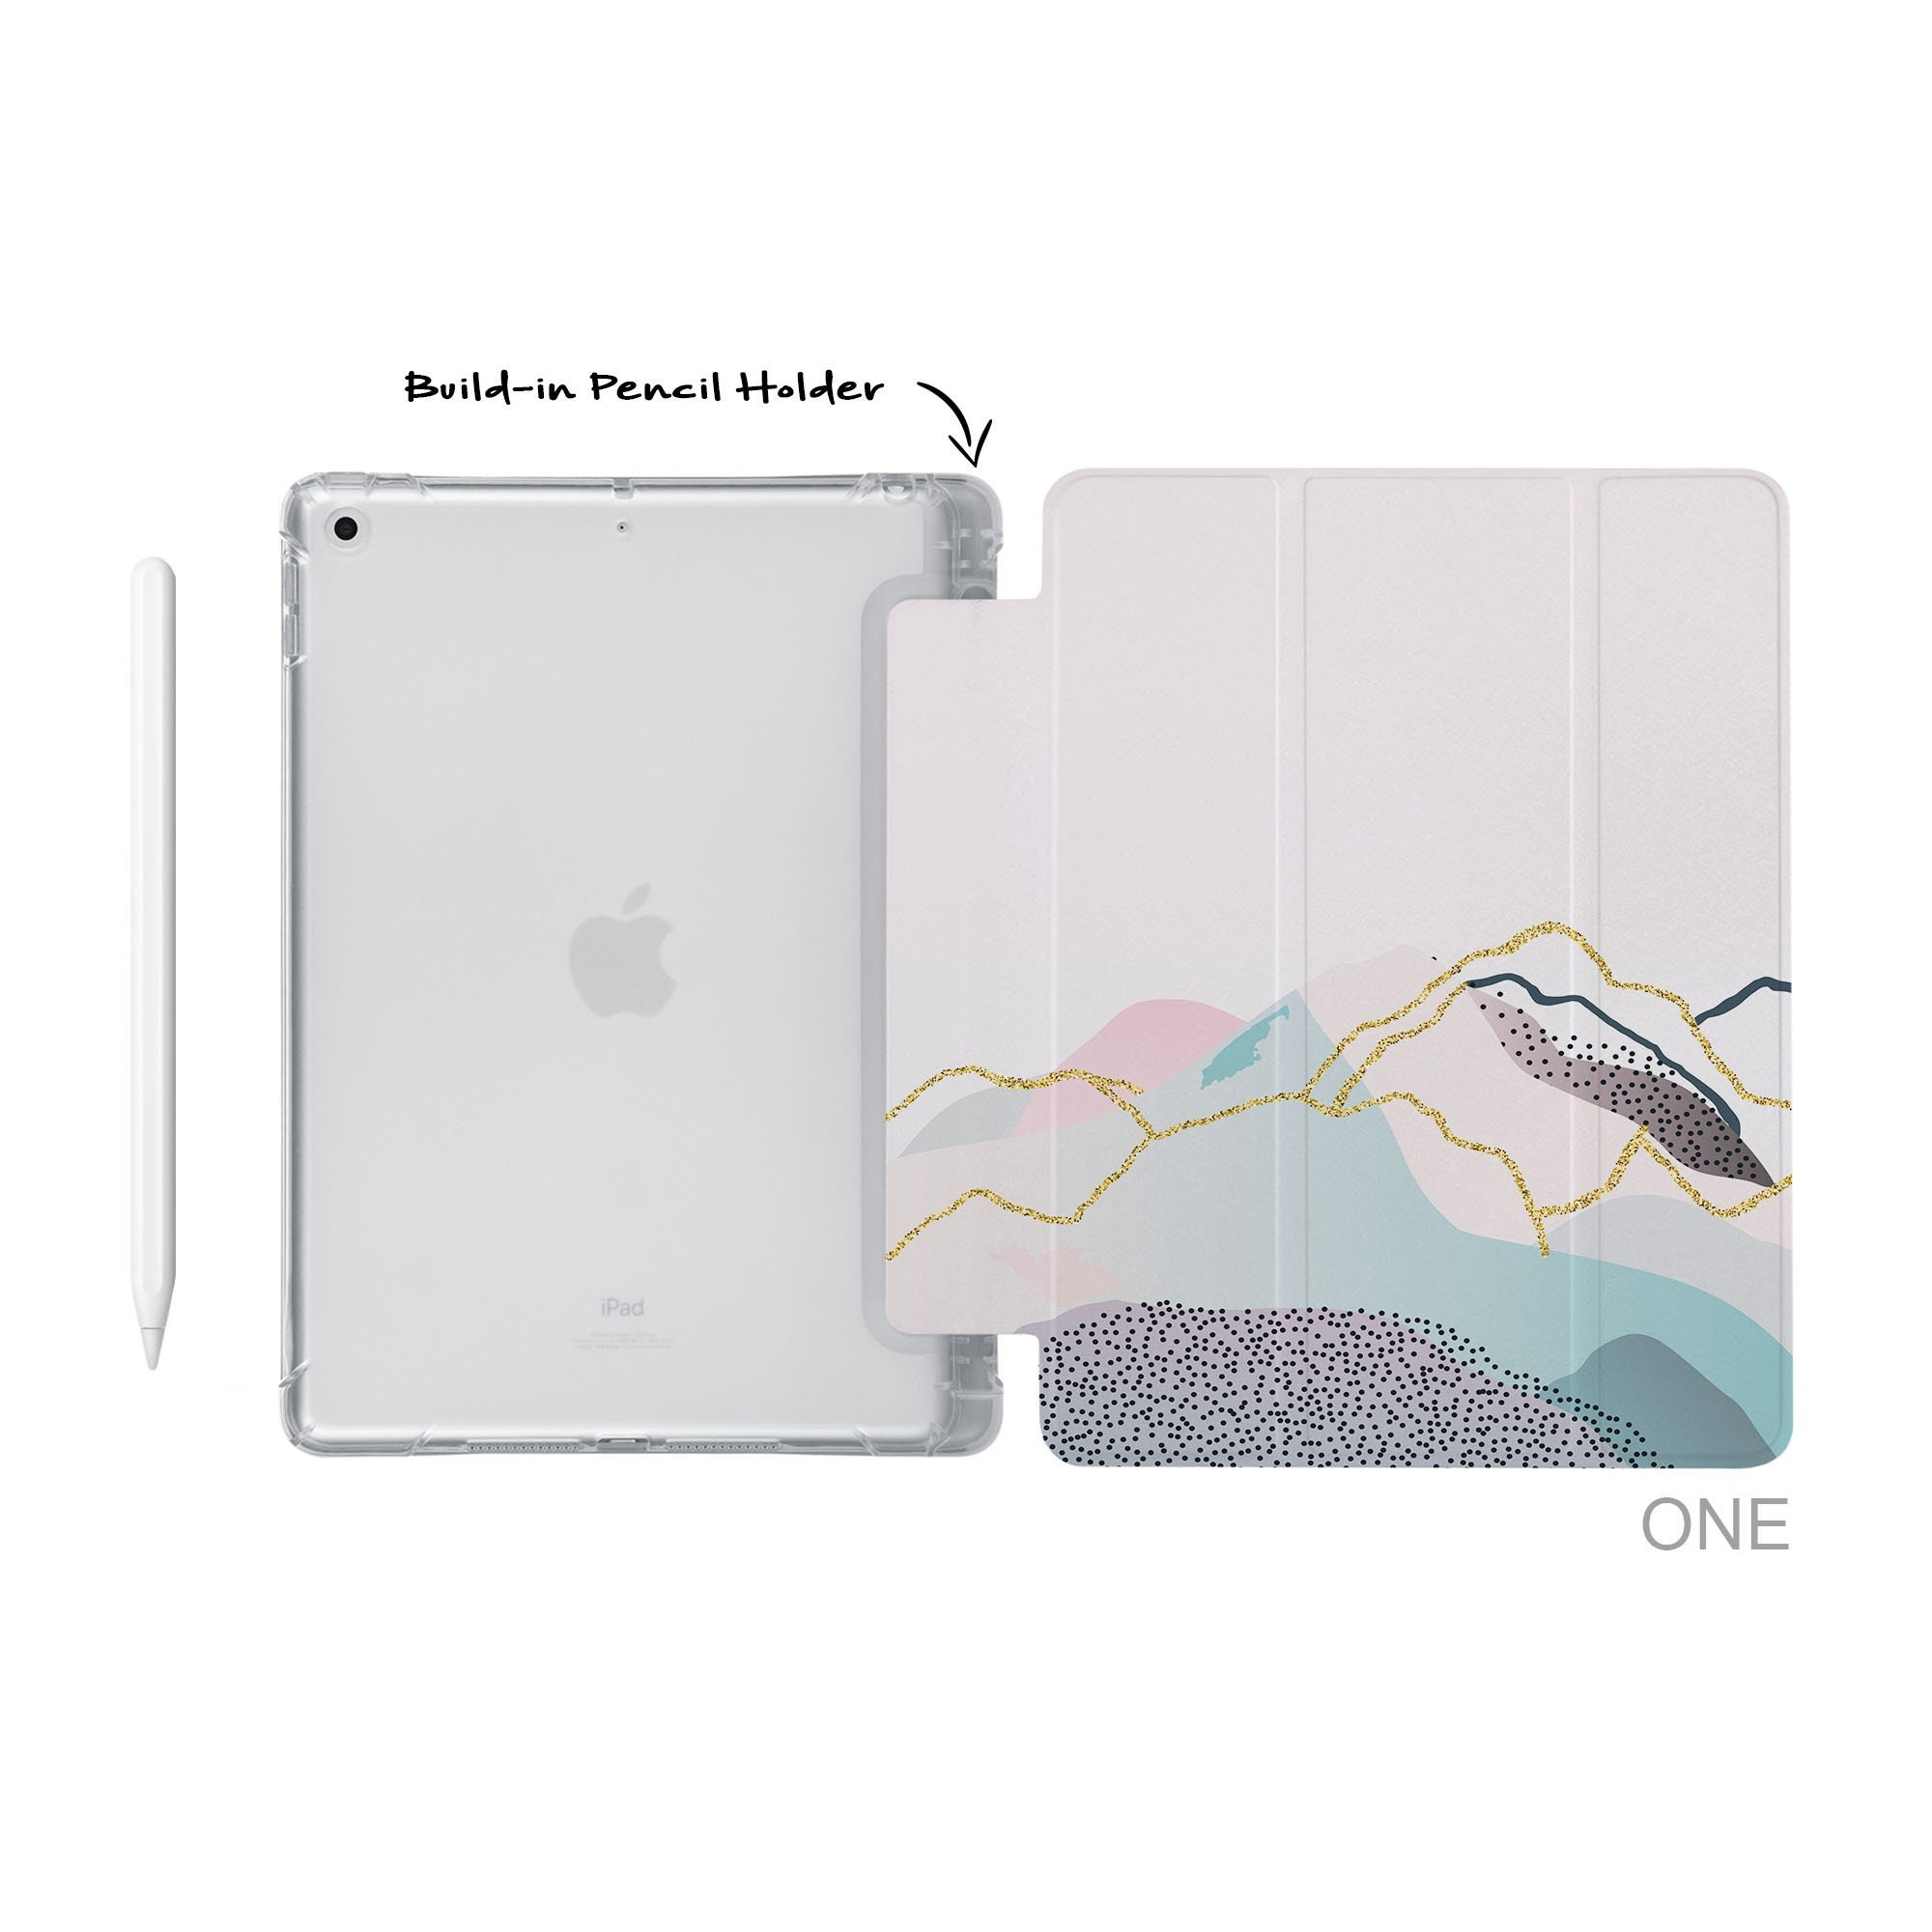 IPad Slim Lightweight Case Build-in Apple Pencil Holder Soft TPU Back Cover  for iPad 10.9 10.2 9.7 Pro 11 Pro 12.9 Mini 6 5 4 Colorful Plant 